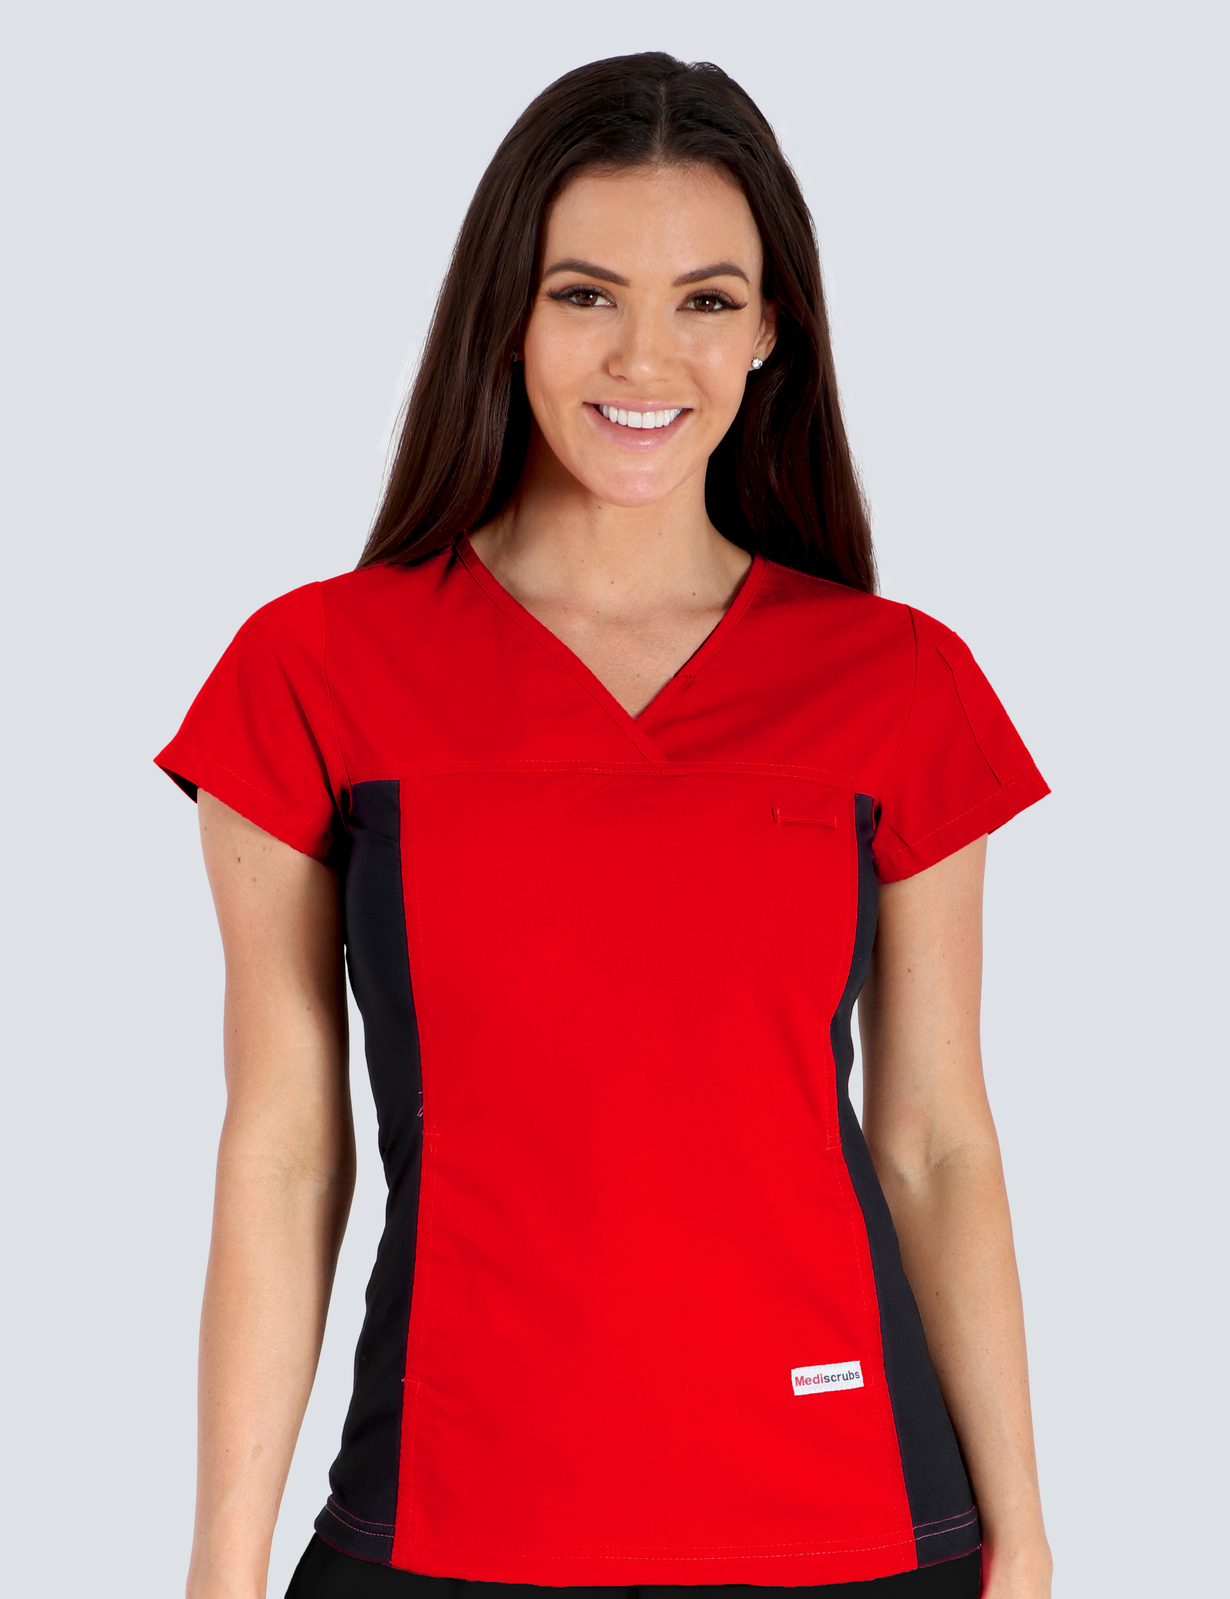 Emergency Department Administration Uniform Set Bundle (Women's Fit Spandex Top in Red and Regular pants in Black incl Logos)